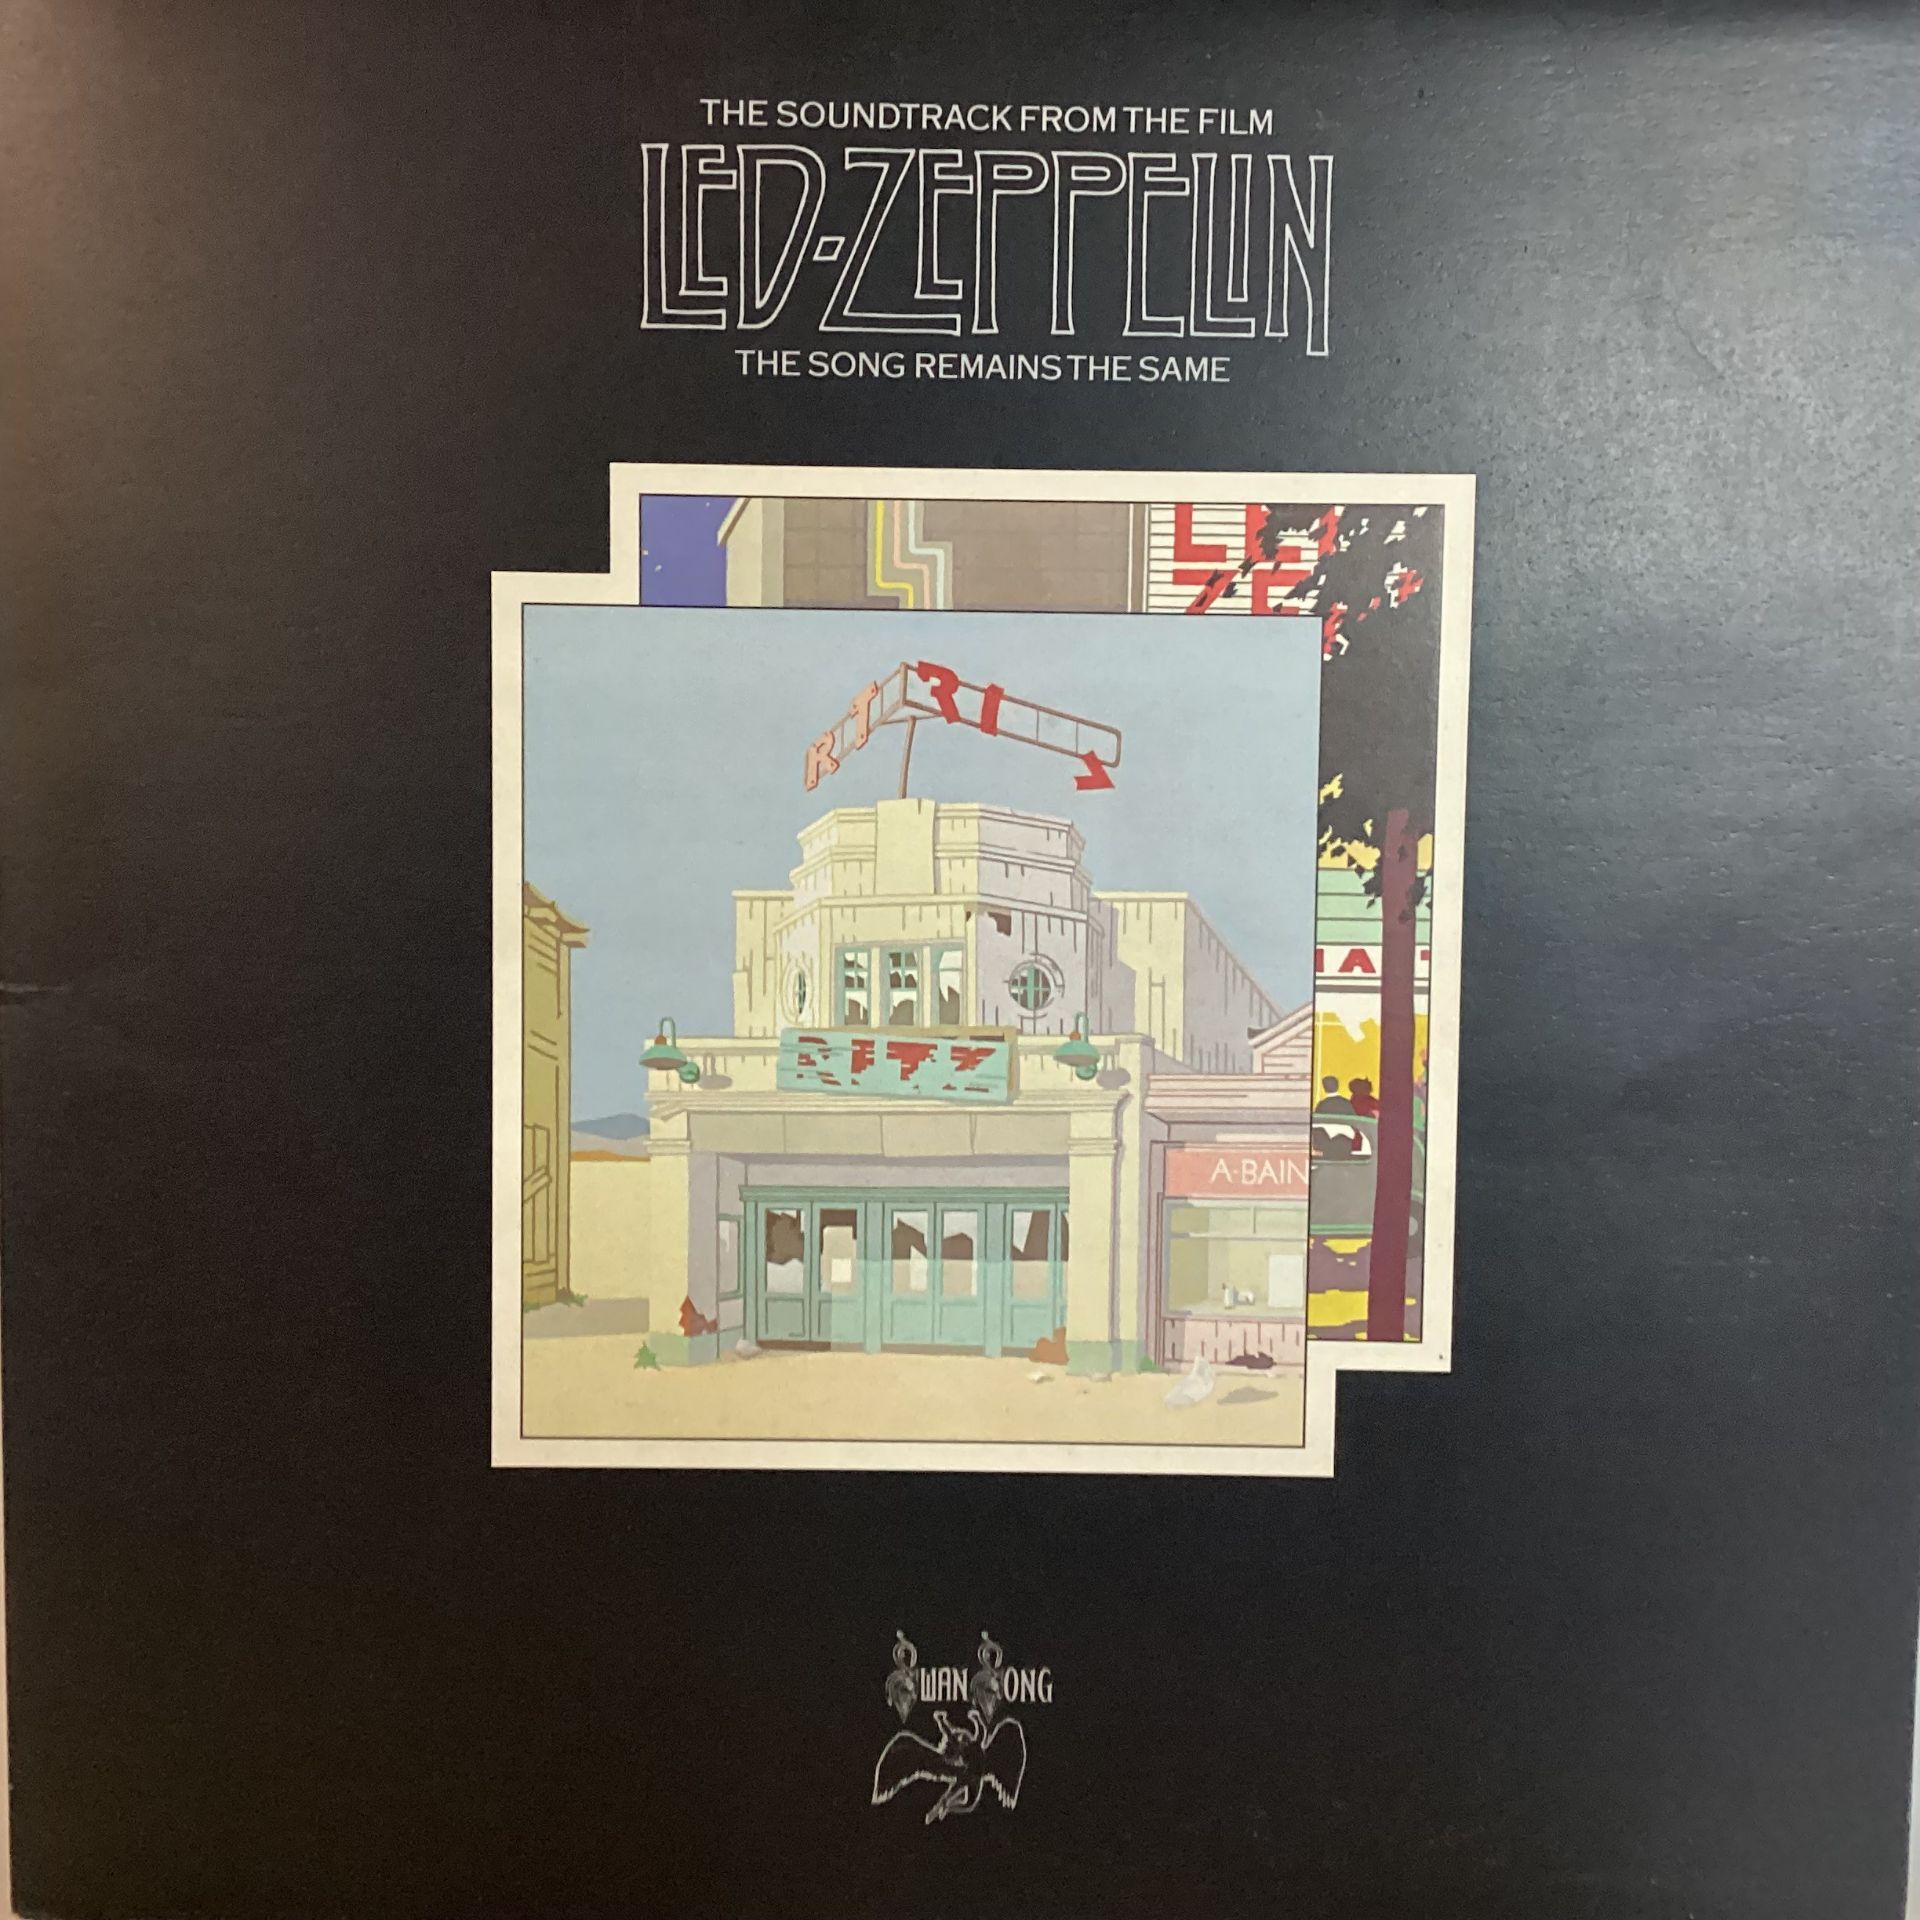 LED ZEPPELIN VINYL LP ‘THE SONG REMAINS THE SAME’. A first pressing Swan Song SSK89402 gatefold